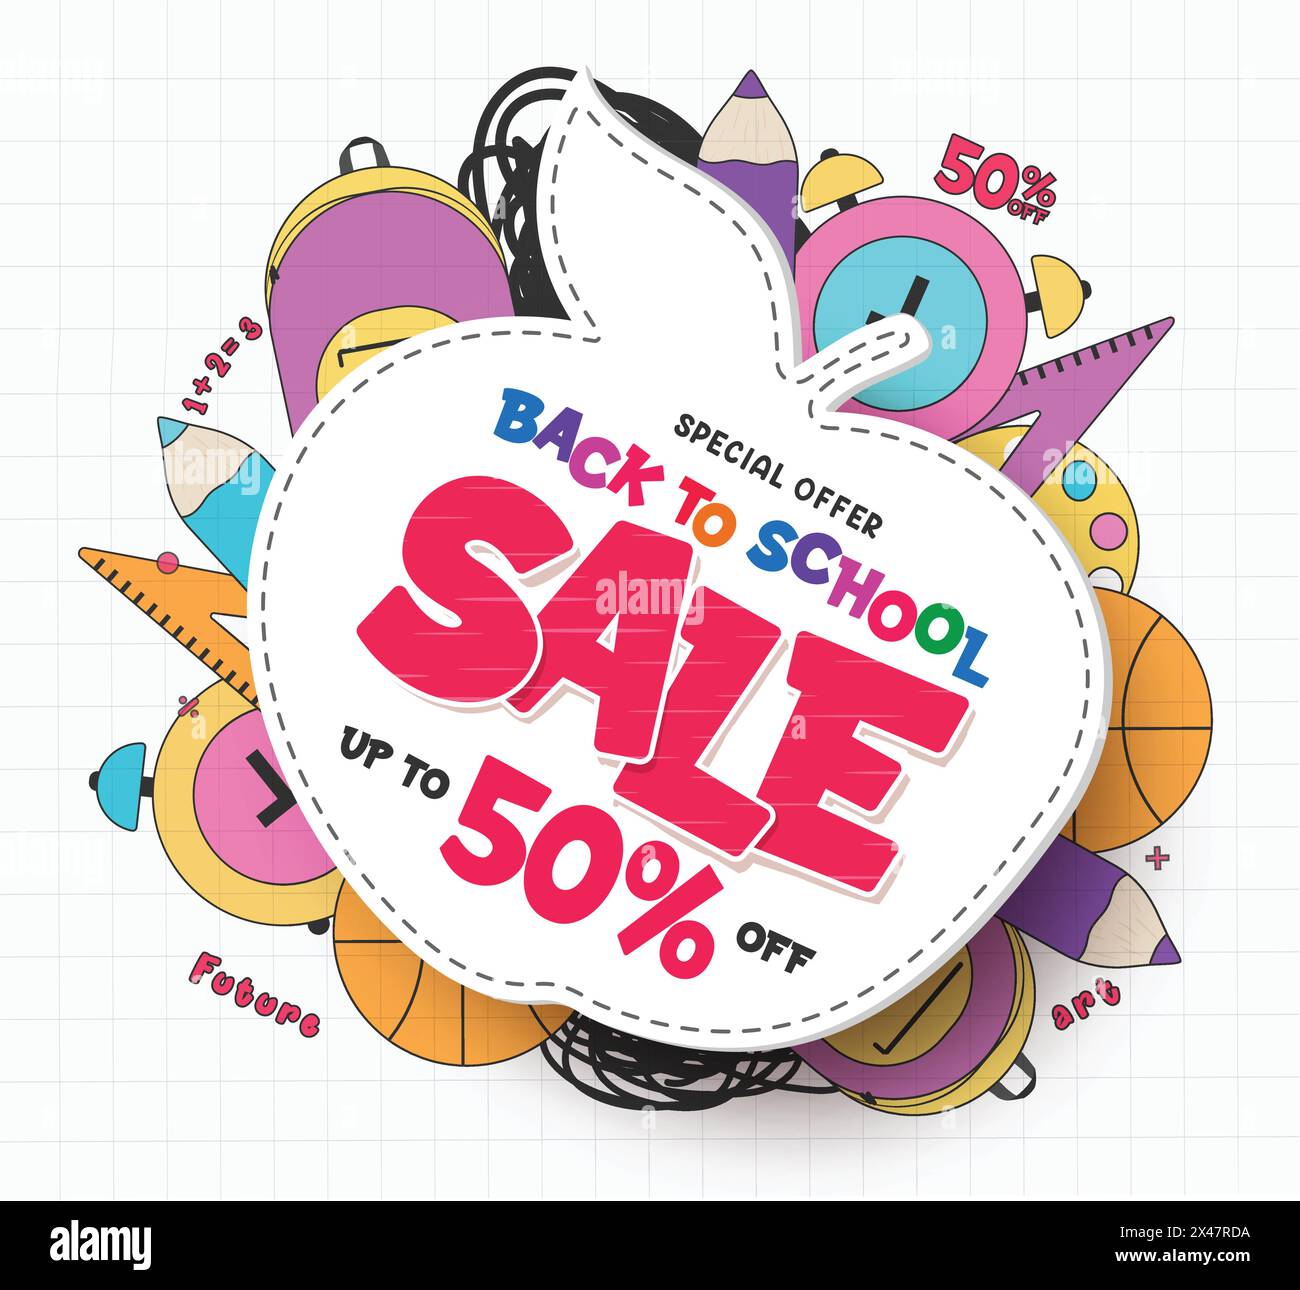 Back to school sale vector template design. Back to school shopping discount offer text in apple paper cut space with colorful materials and items Stock Vector